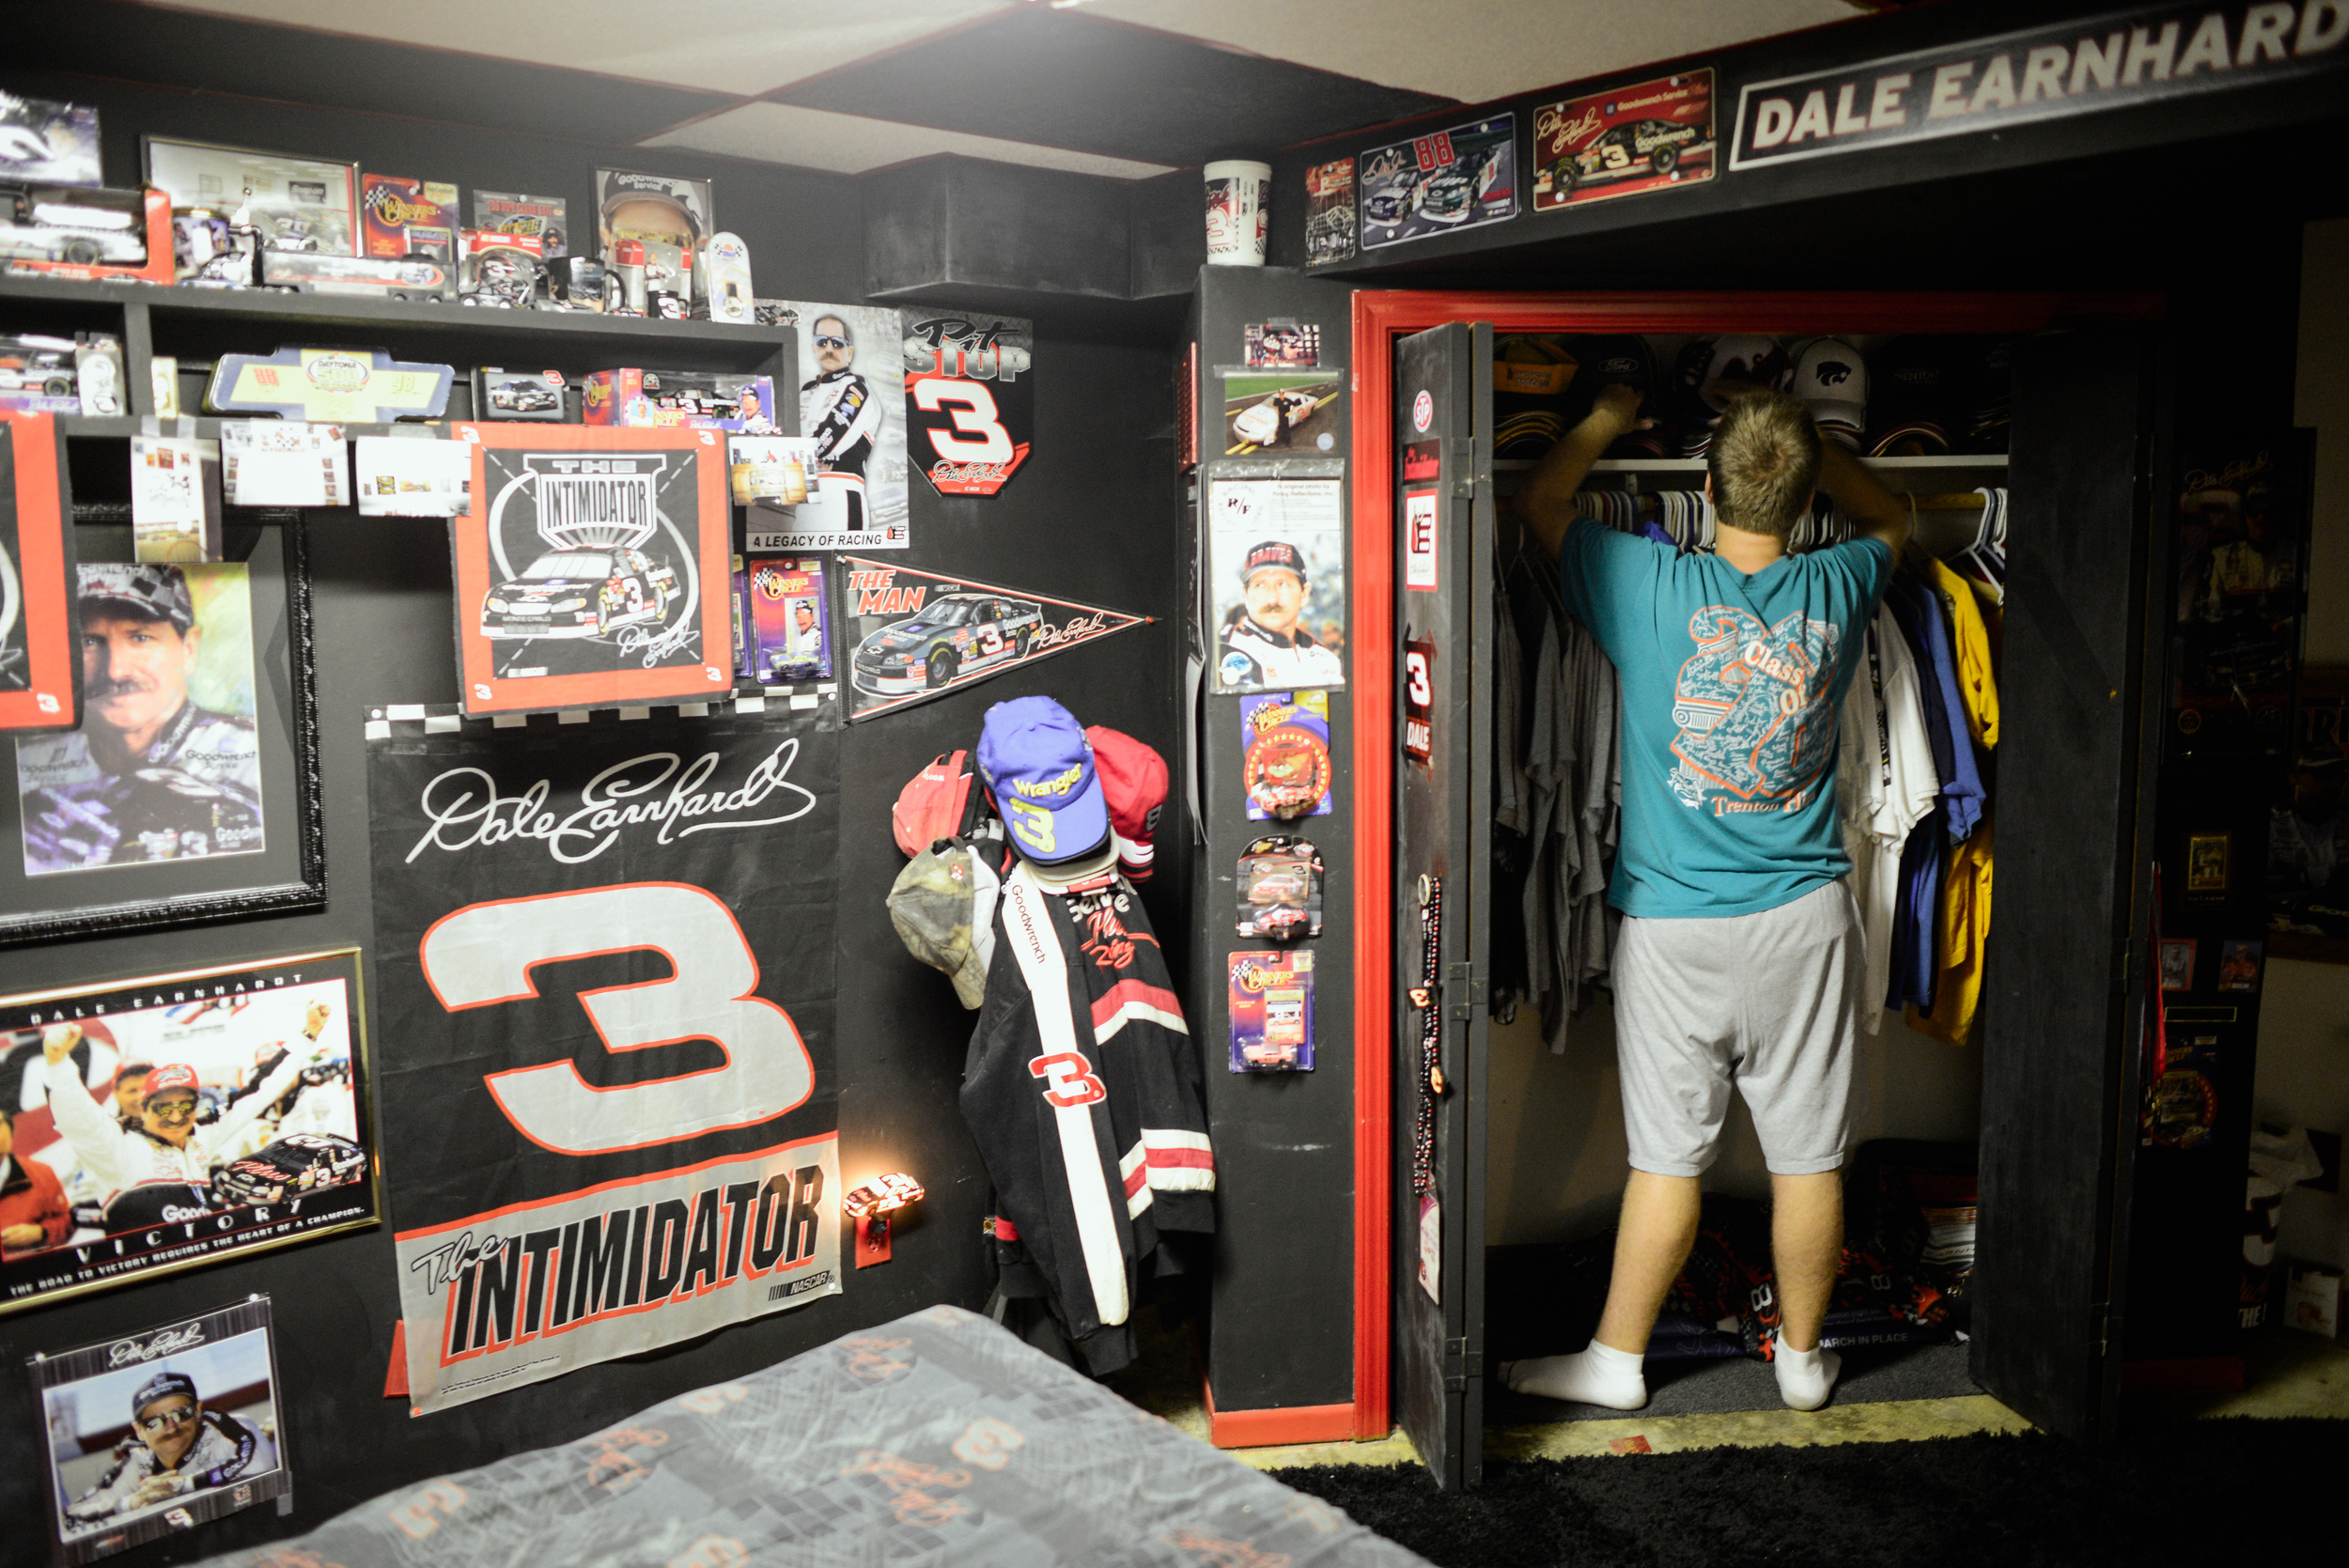  Trenton, Missouri. 2013.  Dalton straightens his hat collection in his bedroom closet. While a fan of many sports his bedroom is dedicated exclusively to Dale Earnhardt. 